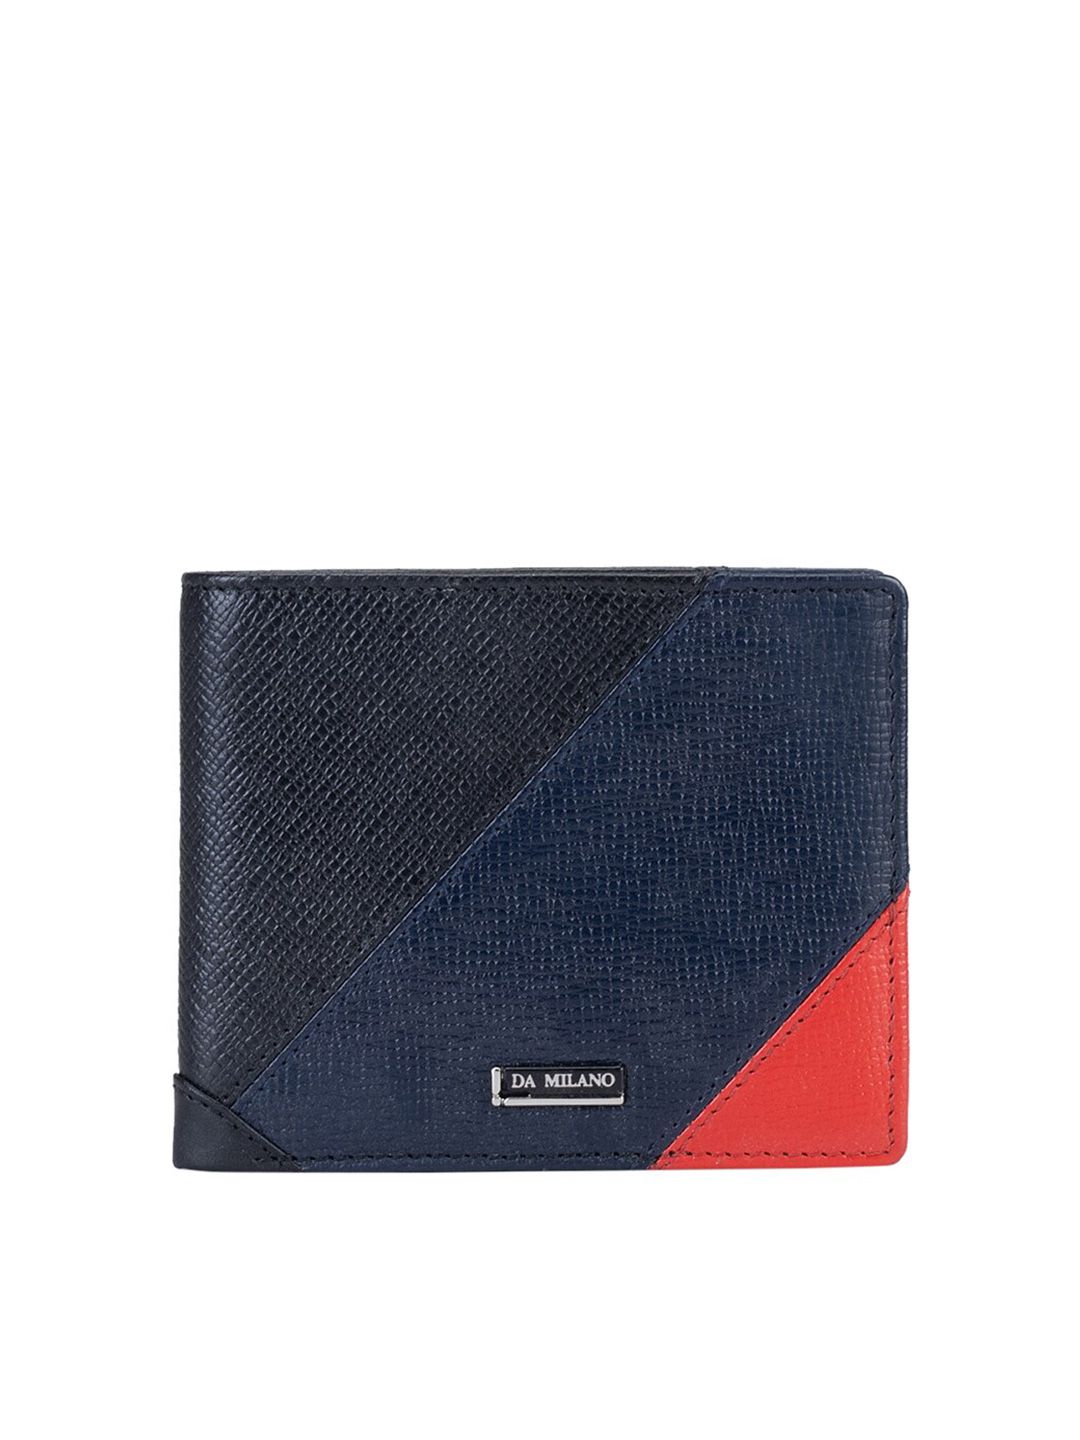 Da Milano Women Black & Navy Blue Textured Leather Two Fold Wallet Price in India